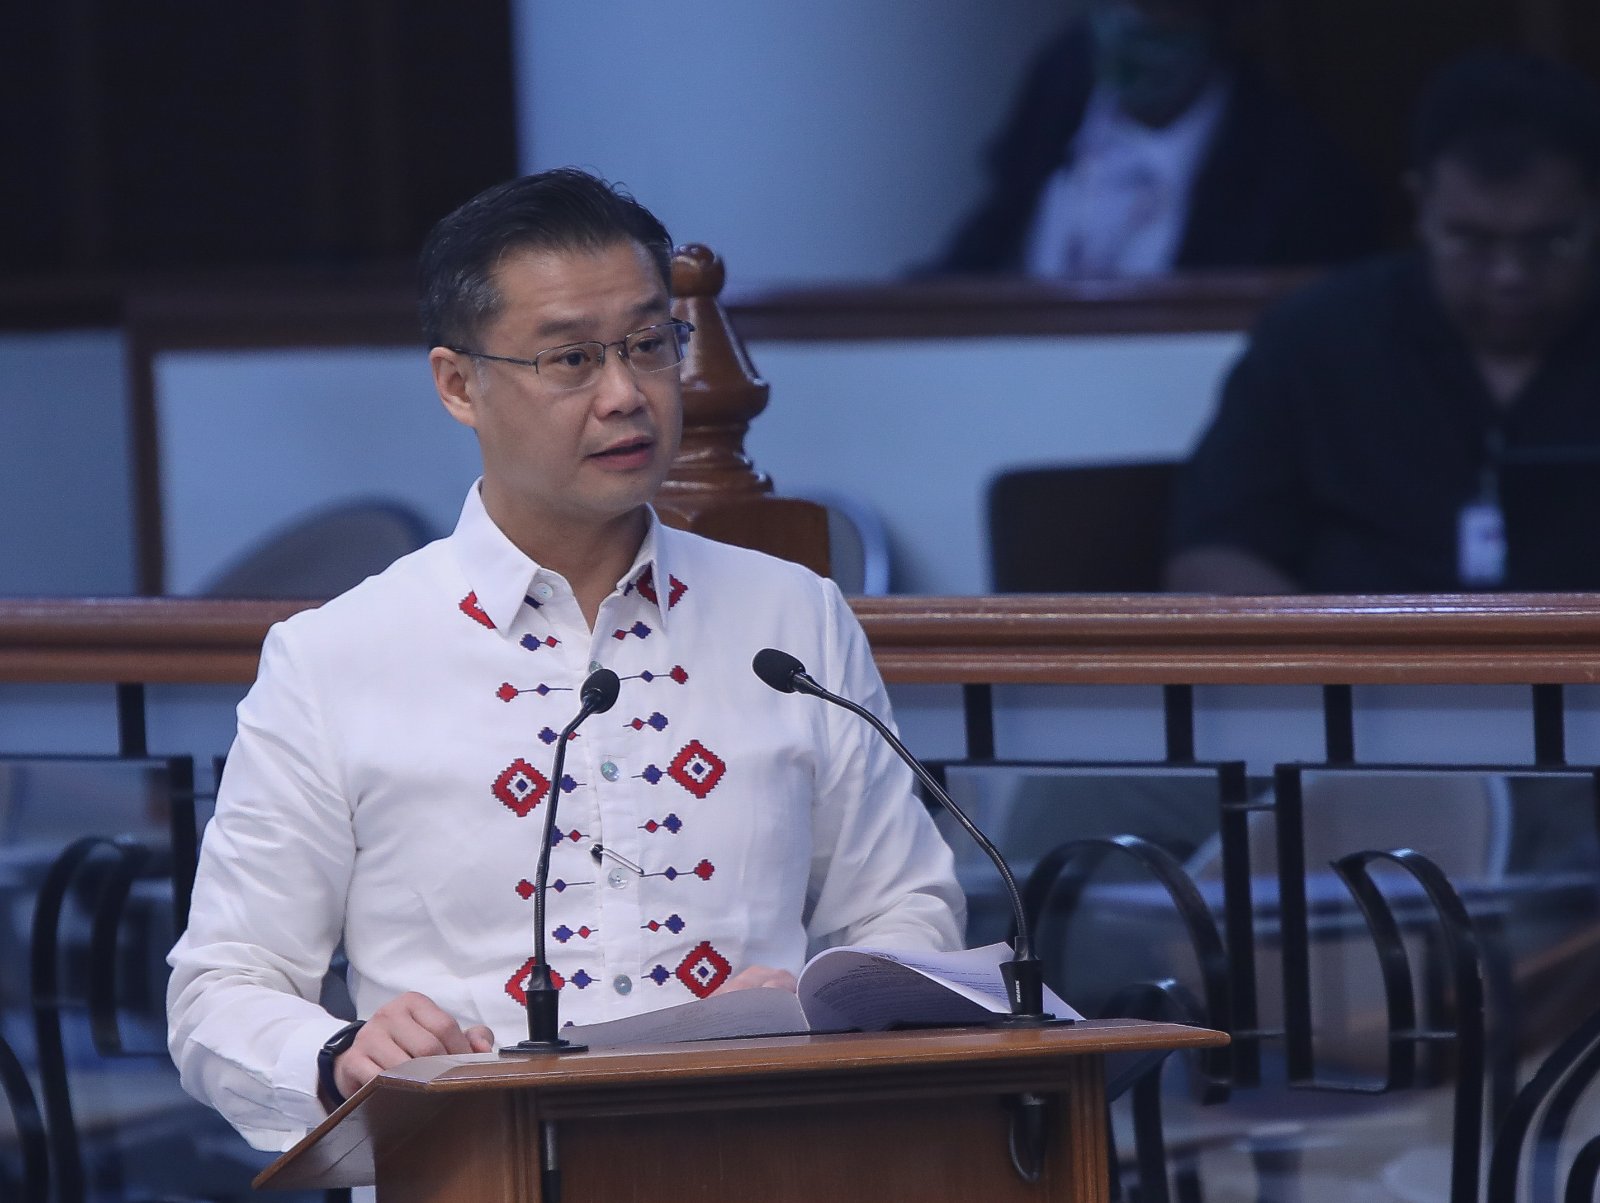 More than 542,000 senior high school students all over the country are still without regular classrooms due to the ineffective implementation of the government’s subsidy program for poor learners, Sen. Sherwin Gatchalian said on Saturday.